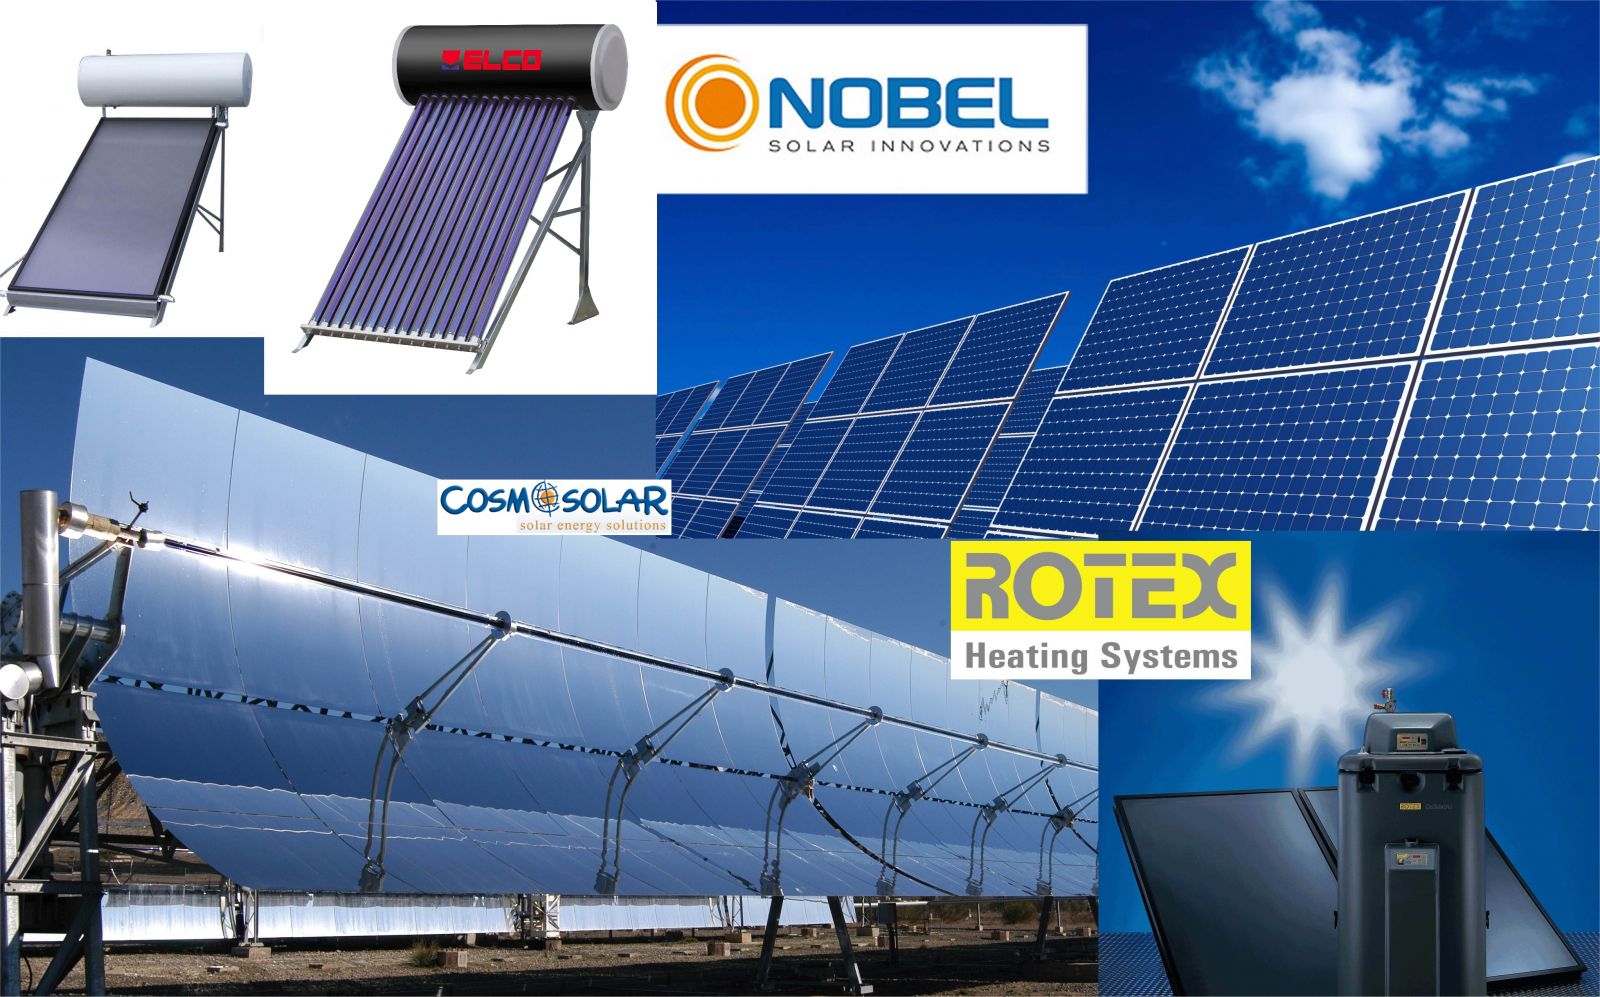 hot waters solar systems rhodes